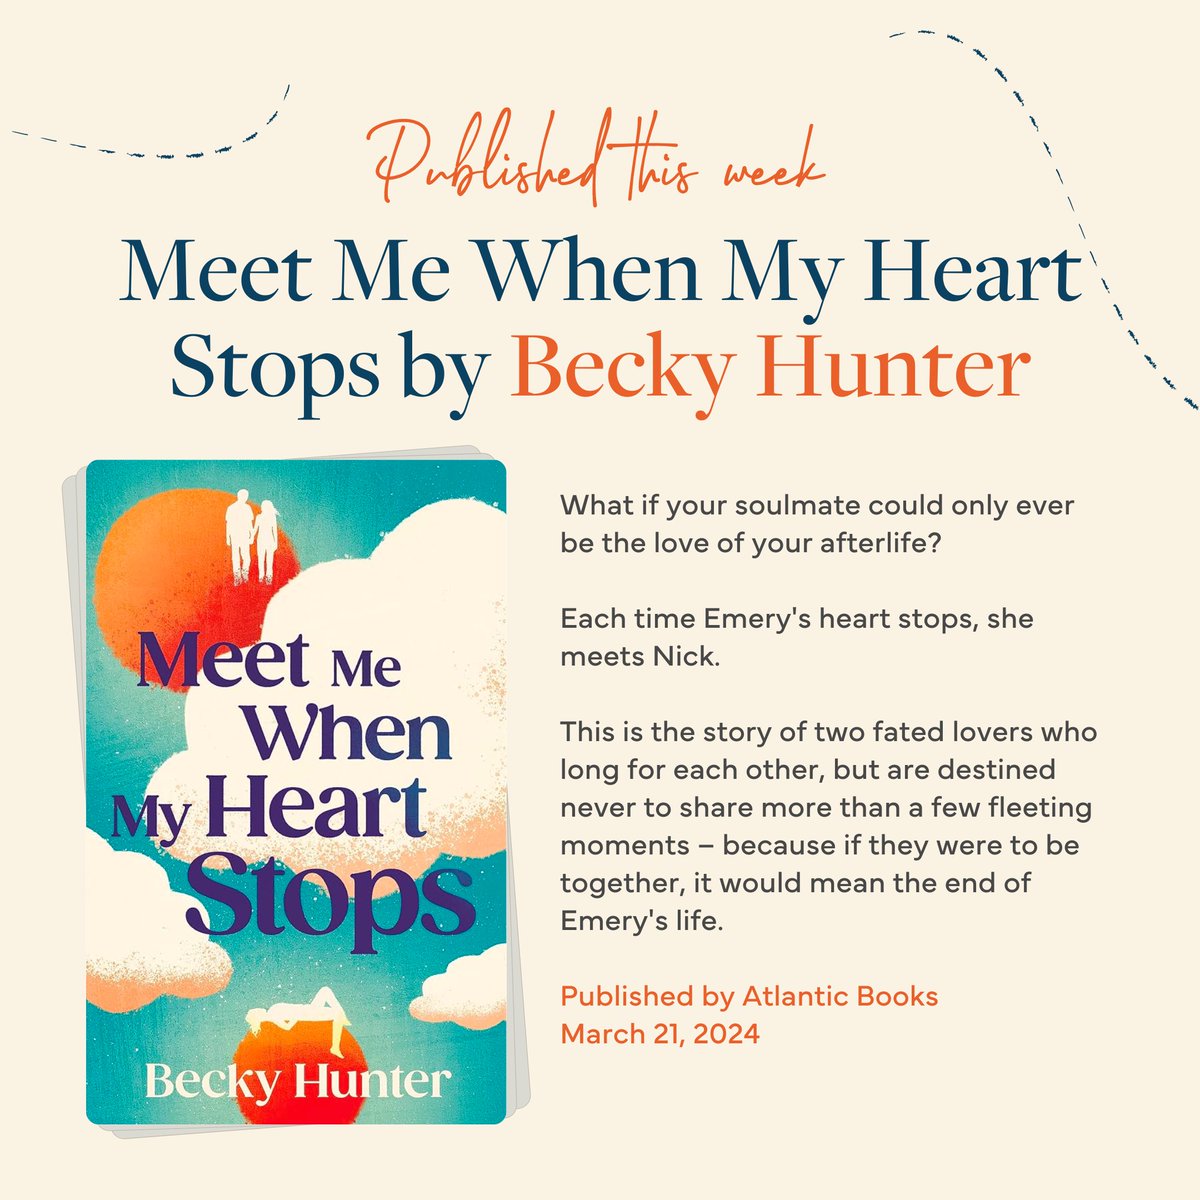 Congratulations to our wonderful writer Becky Hunter whose second novel was published by @CorvusBooks this week! Meet Me When My Heart Stops has been described as an 'utter joy' by Prima and 'swoonsome' by Good Housekeeping. Happy publication week, @Bookish_Becky! #MeetMe